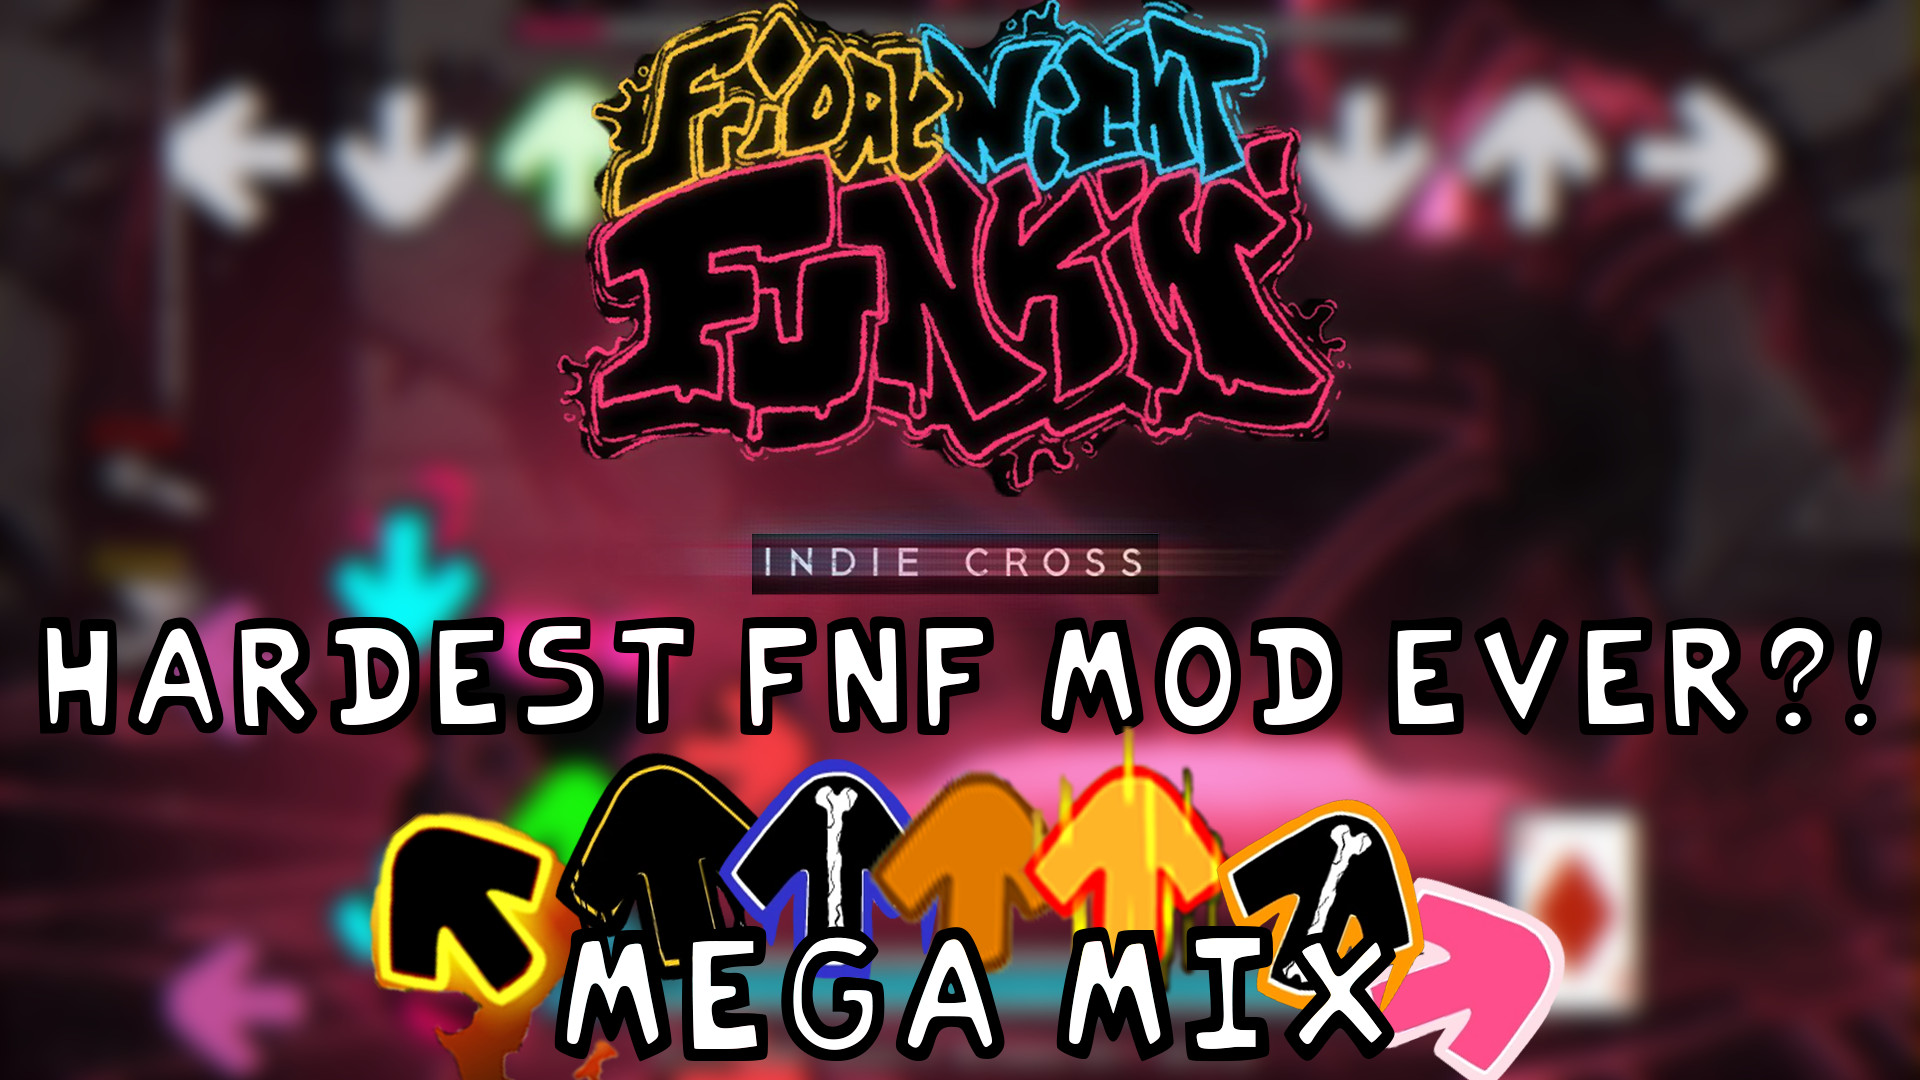 FNF Indie Cross but Harder [Friday Night Funkin'] [Mods]